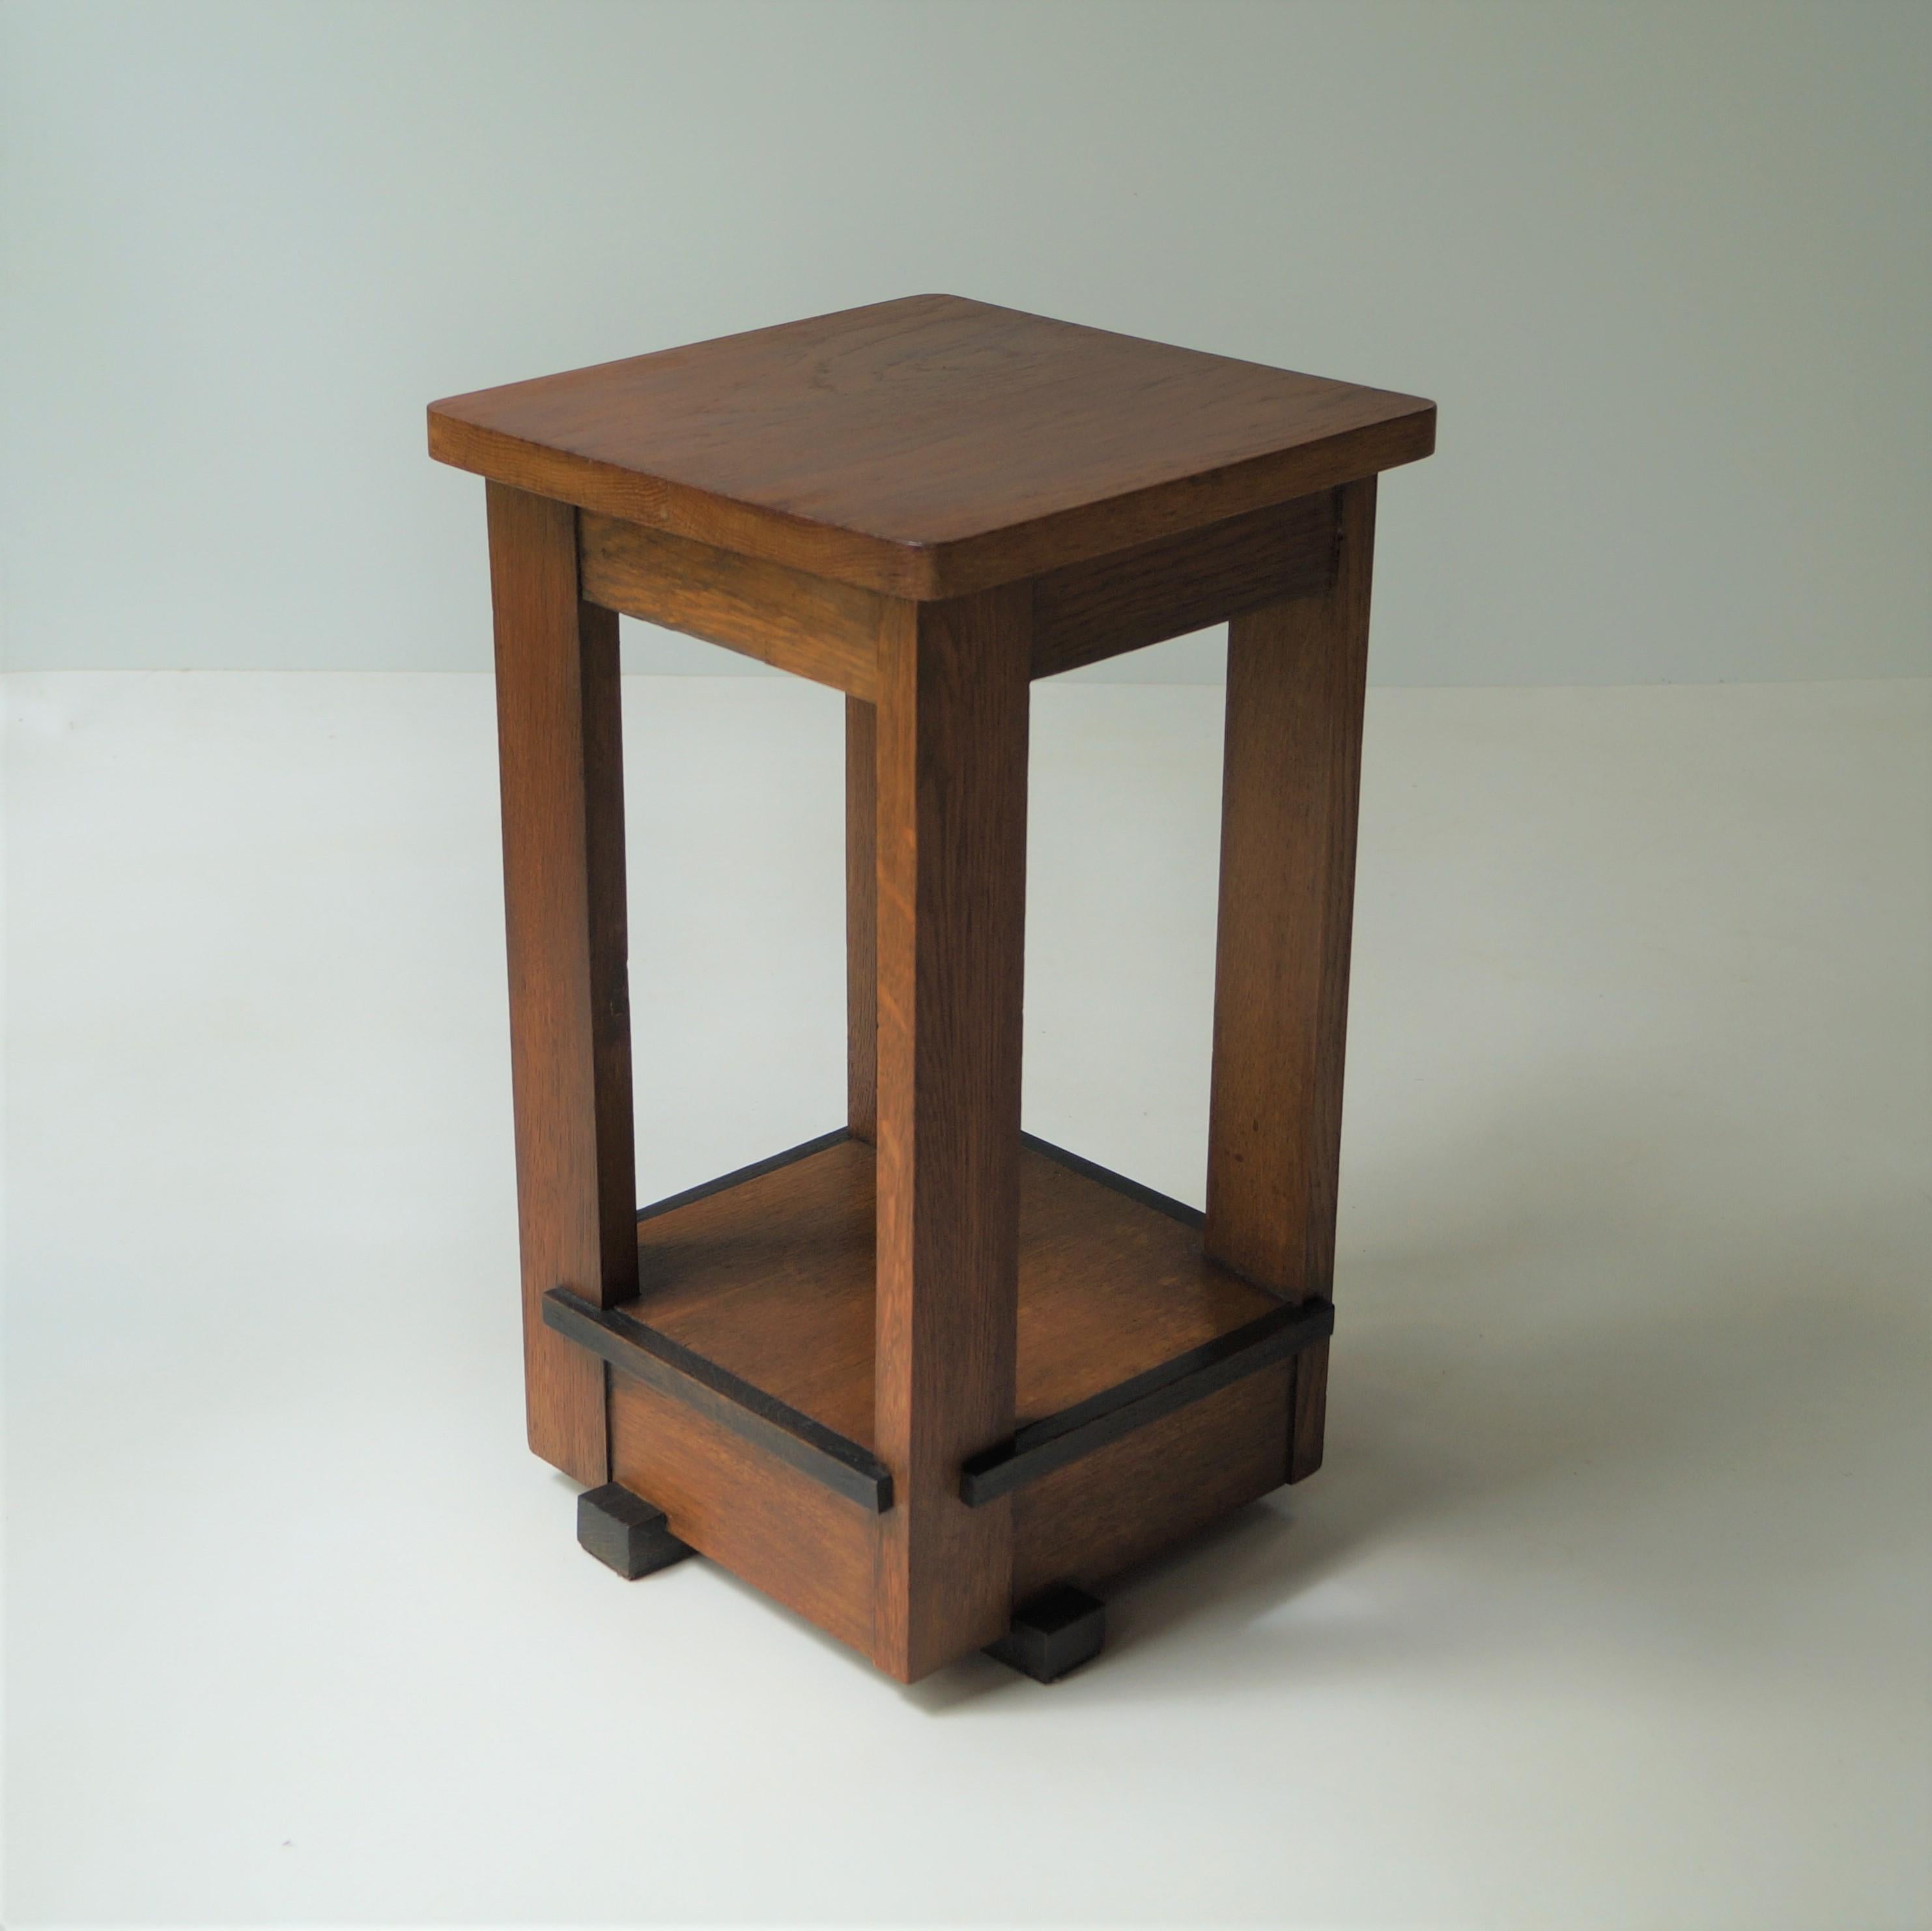 Dutch Art Deco Haagse School side table attributed to Jan Brunott, 1920s For Sale 12